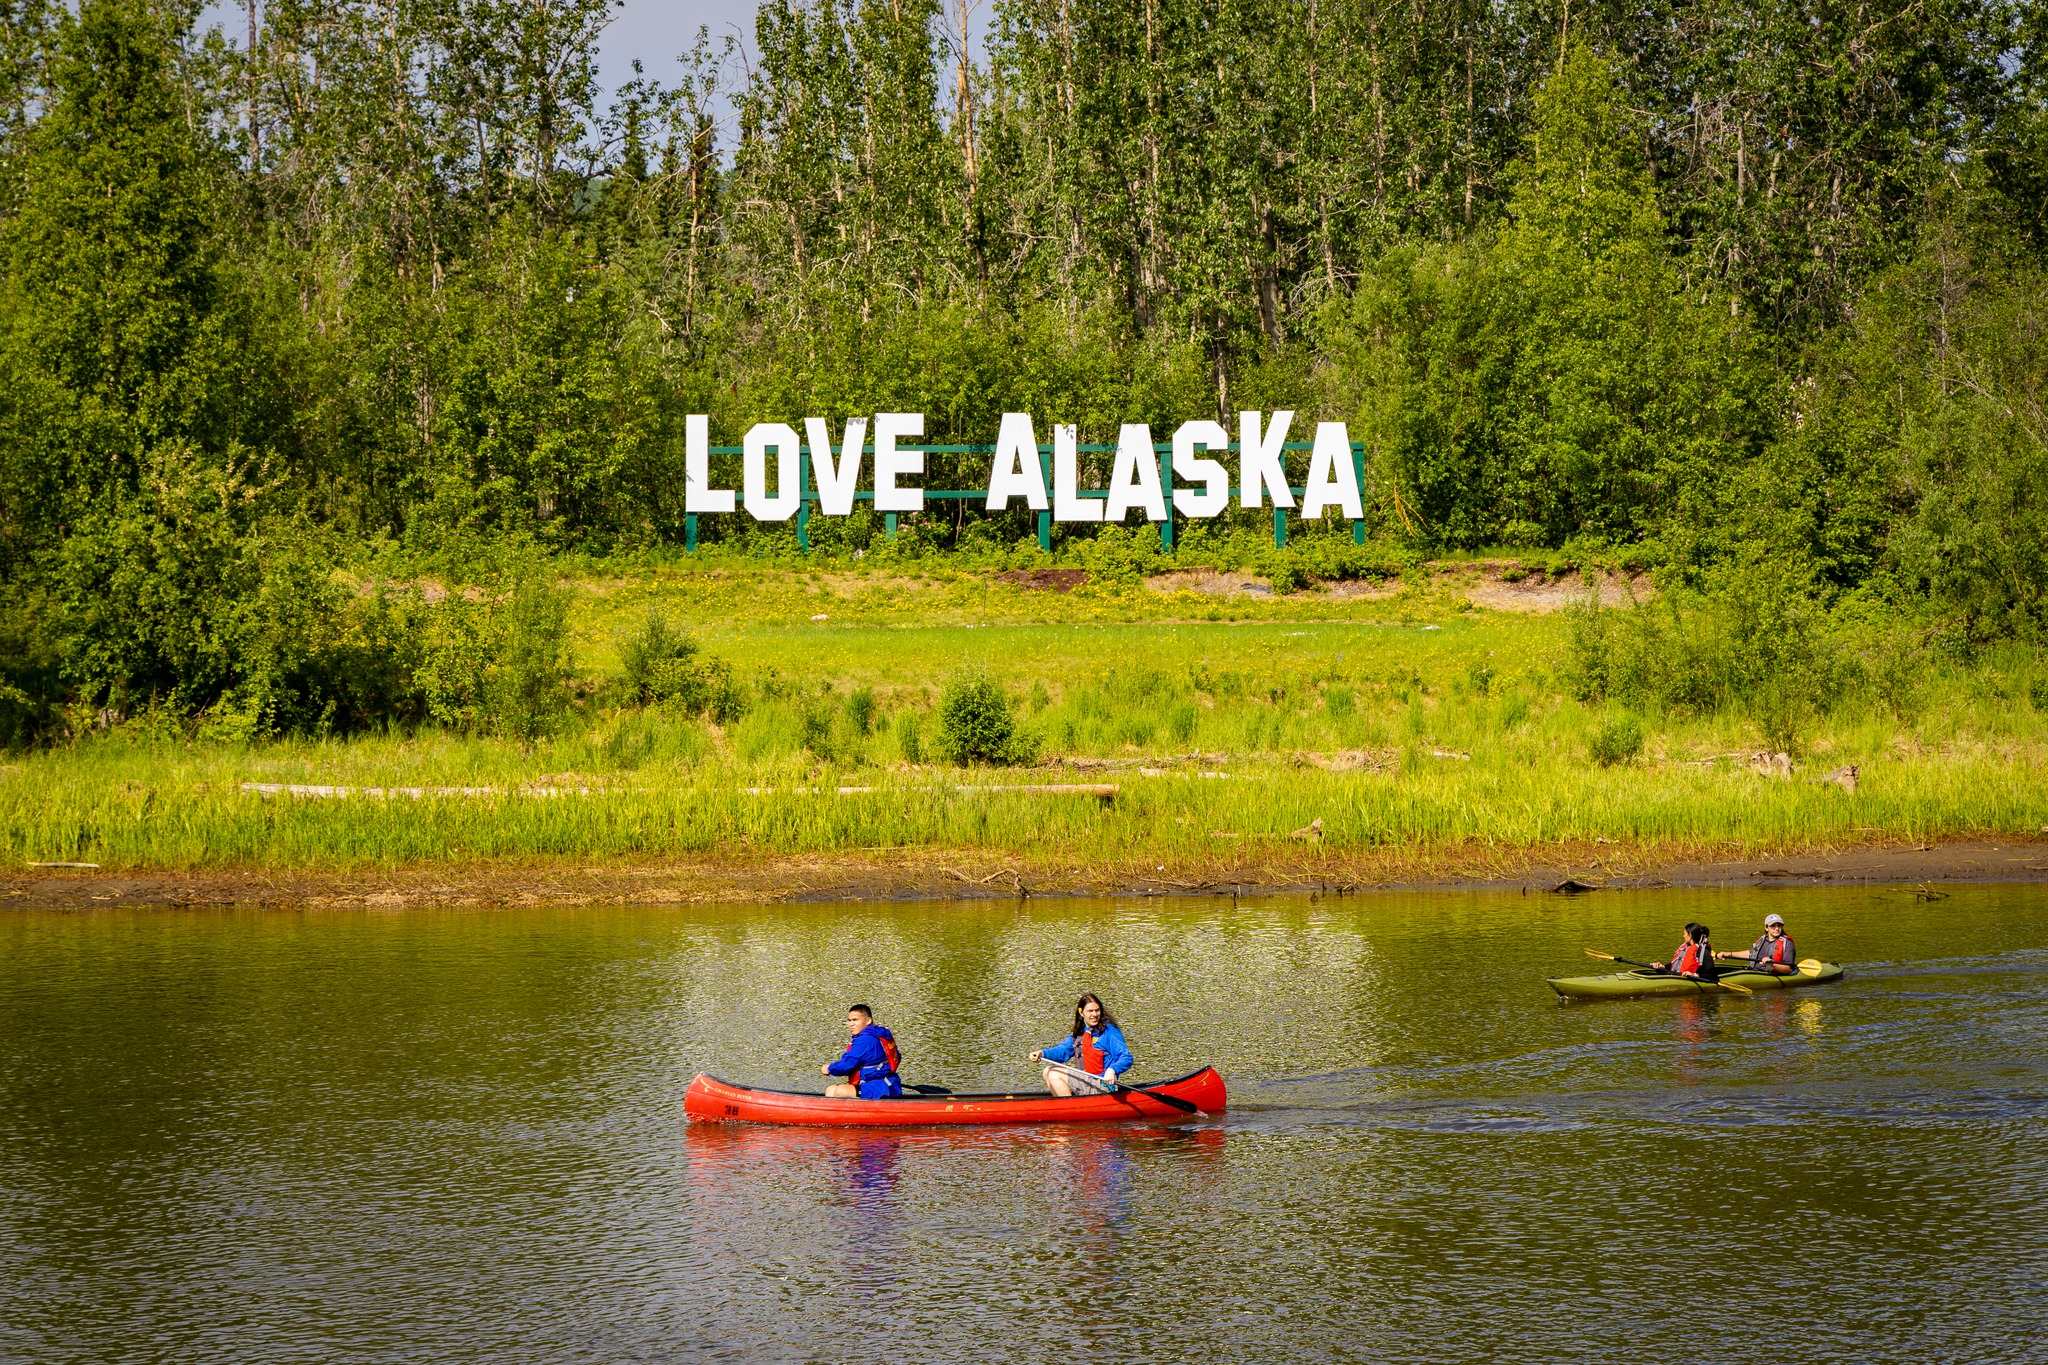 Students canoeing on the Chena River in front of the Love Alaska sign